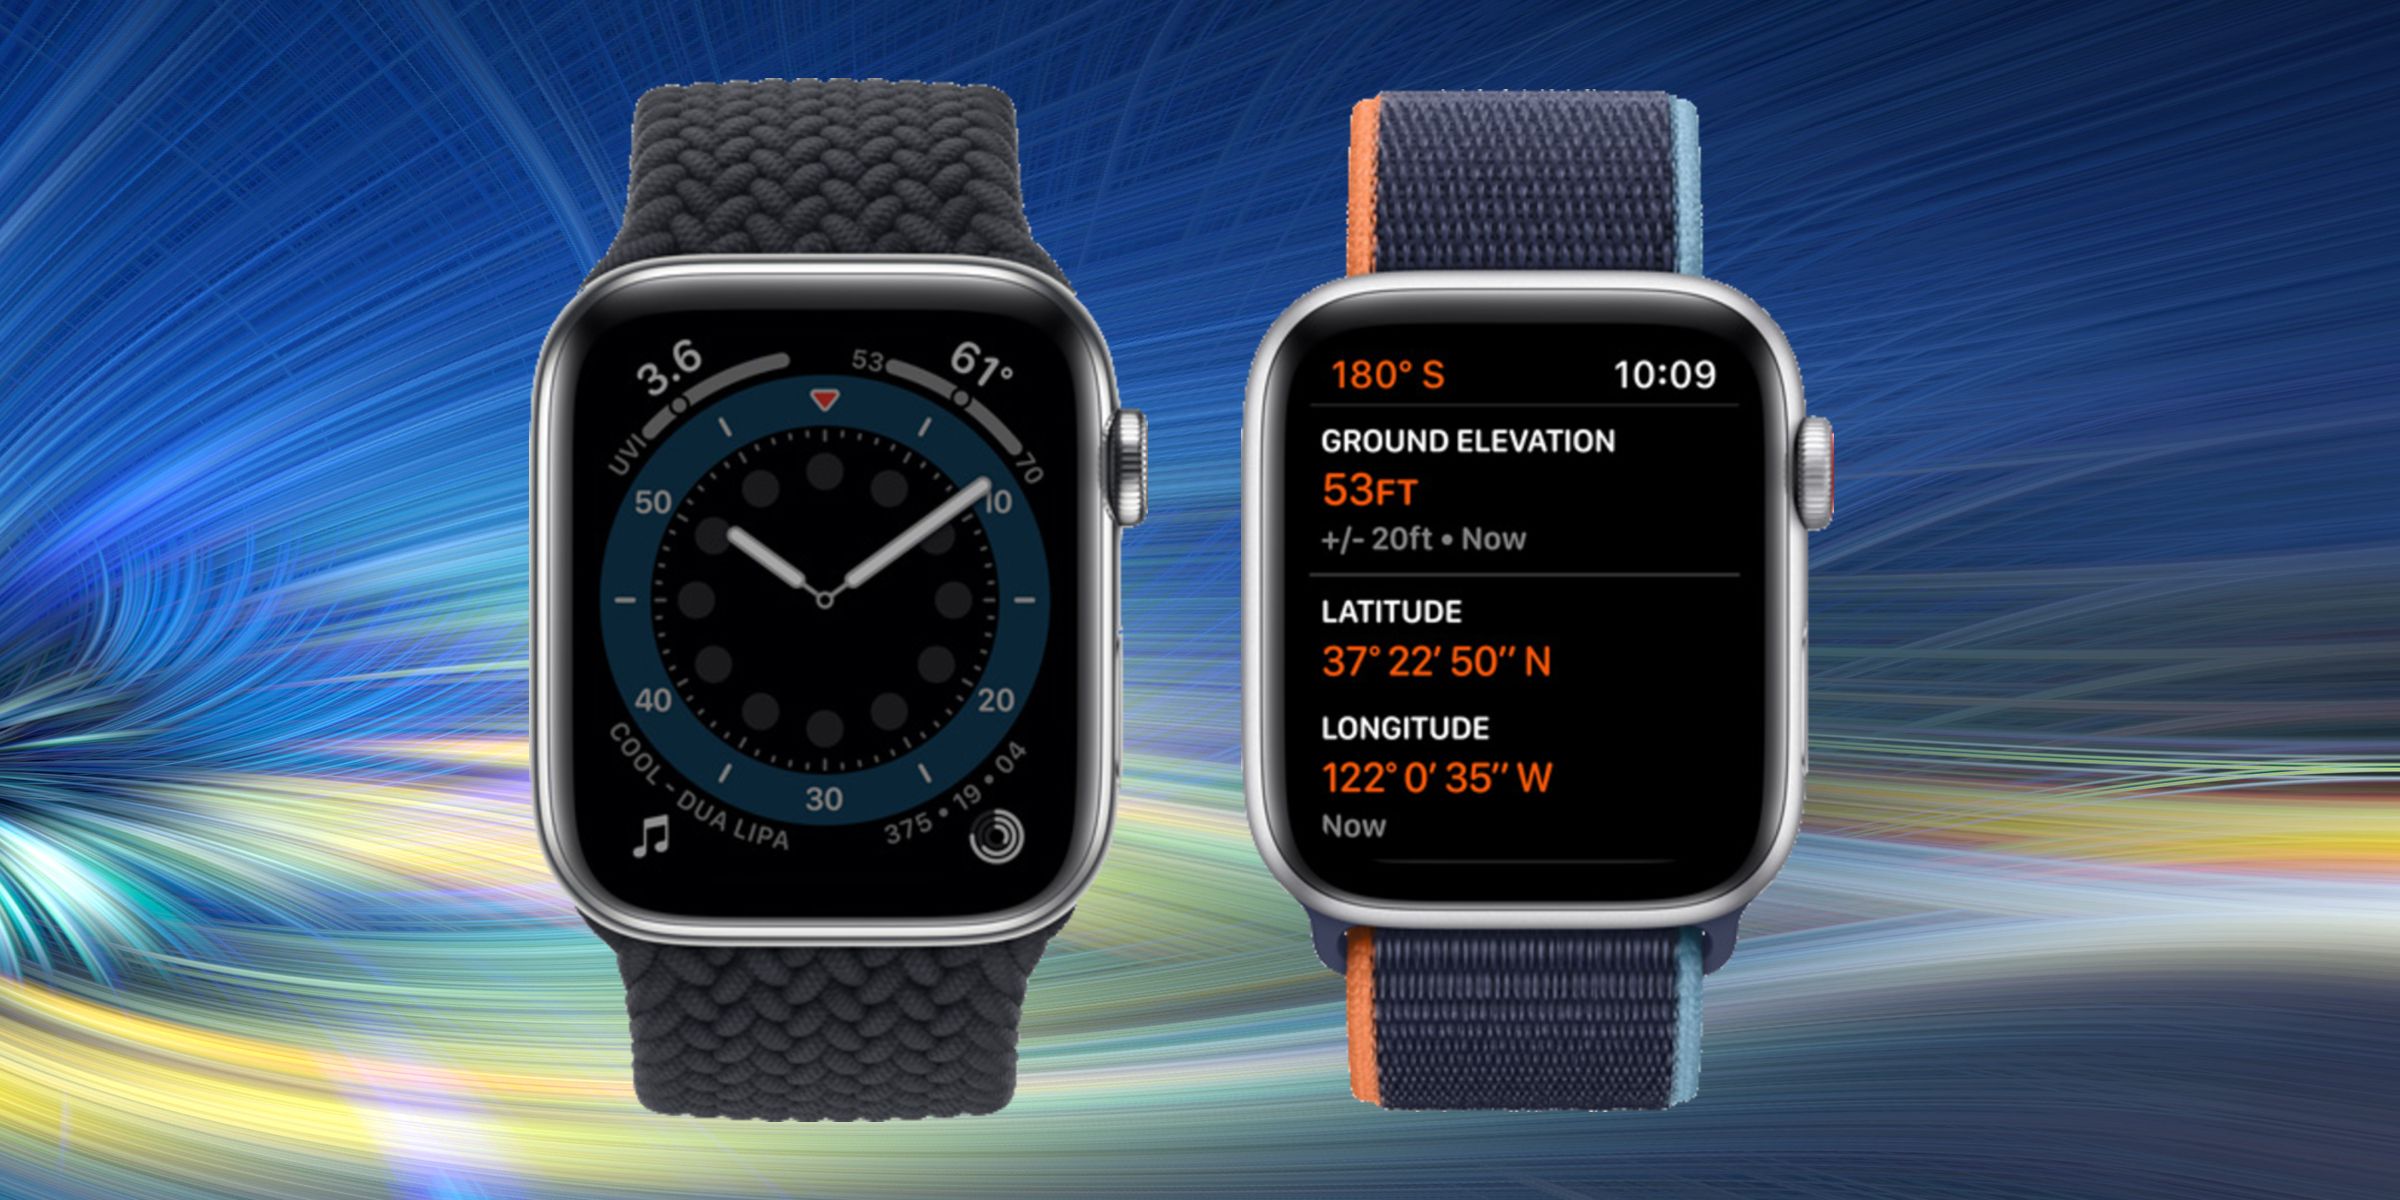 Watch SE Vs. Watch Series 6: How Apple's Affordable Smartwatch Compares